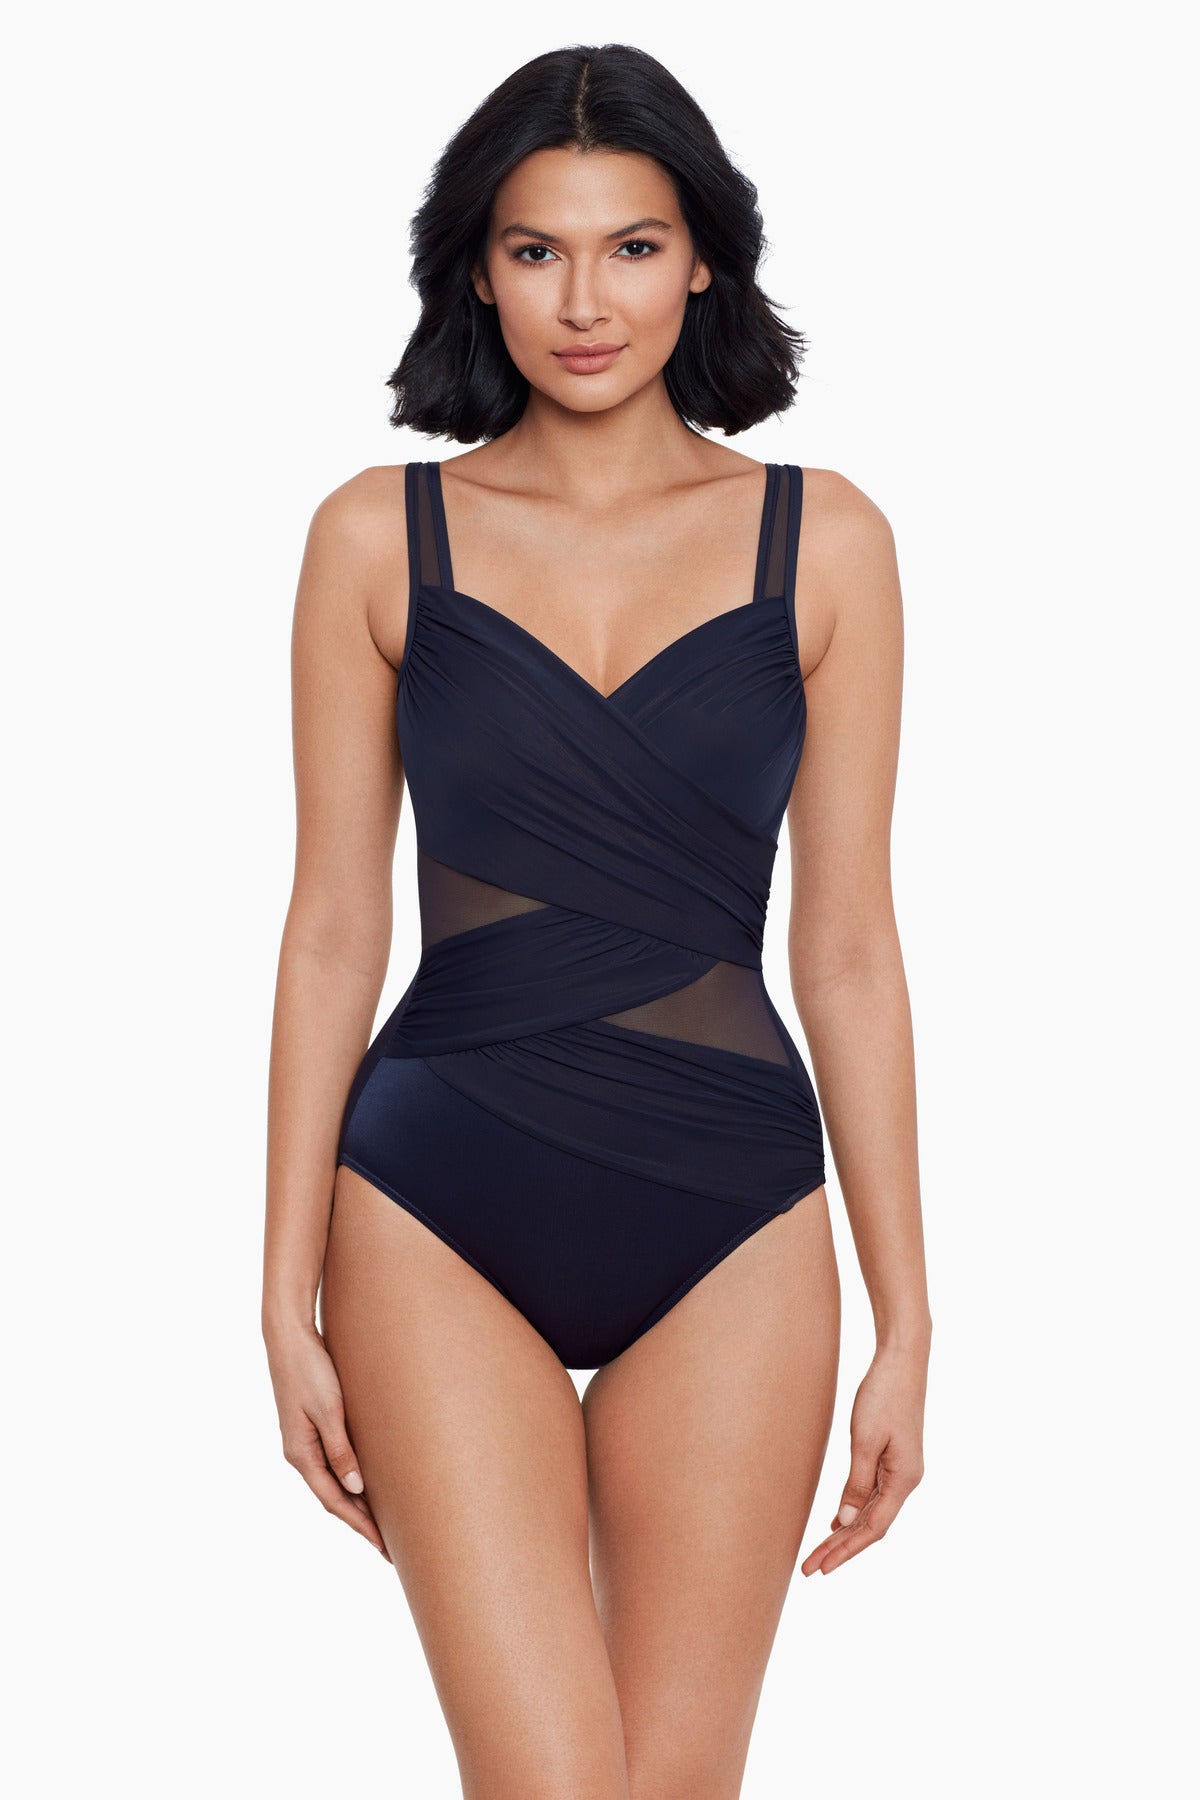 Bodysuits for big cups by Miracle Woman